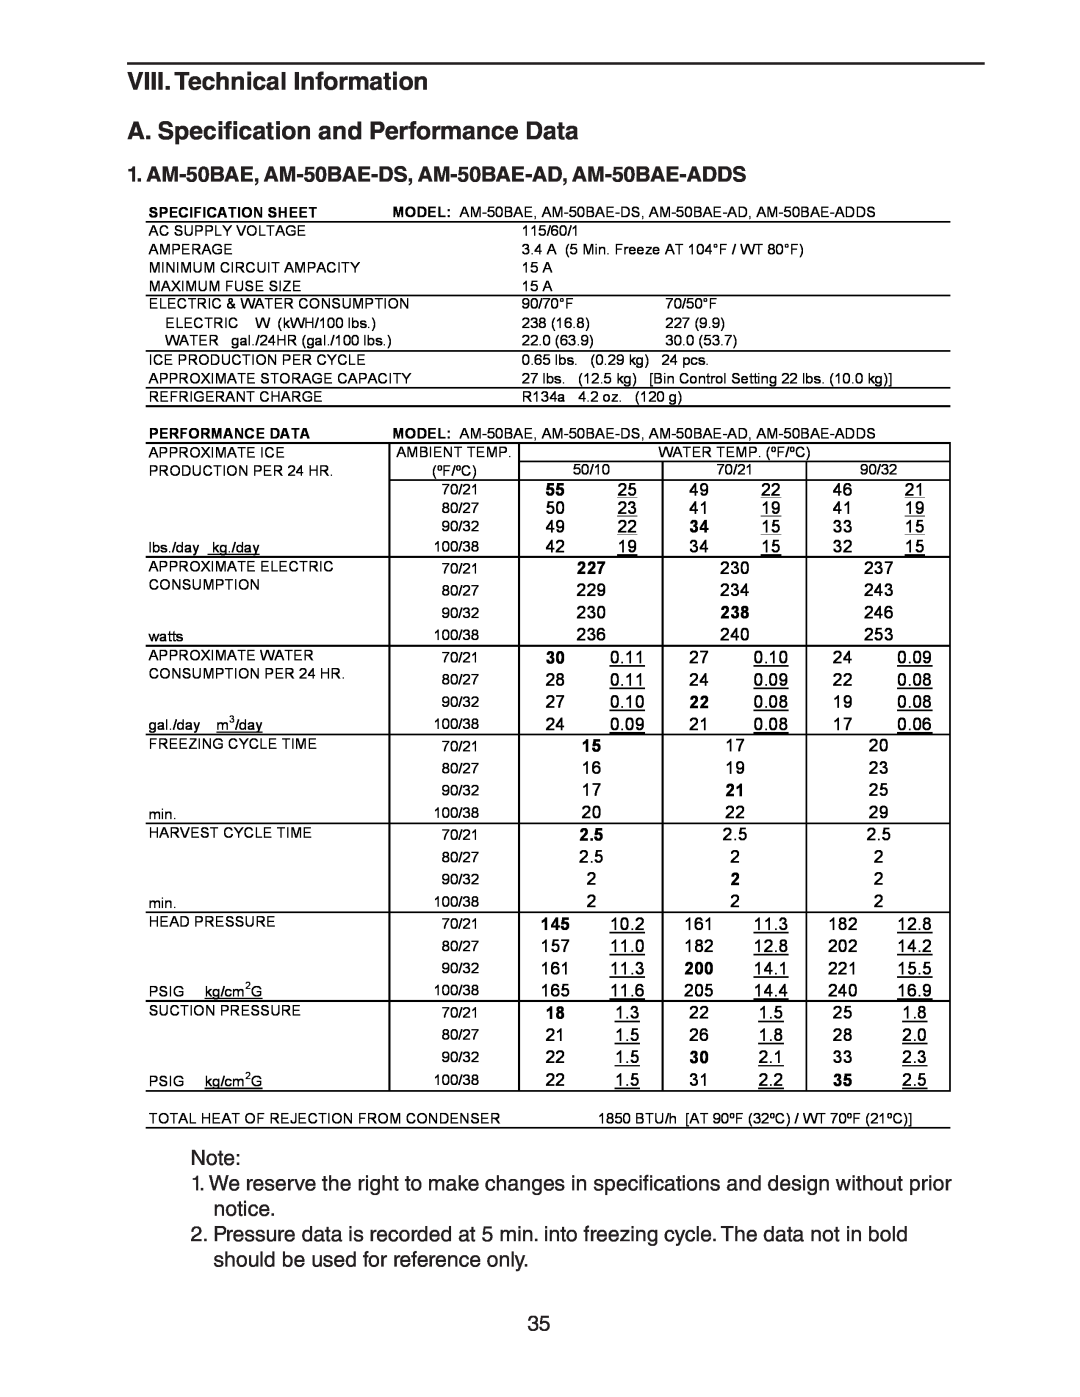 Hoshizaki AM-50BAE-DS, AM-50BAE-ADDS service manual VIII. Technical Information A. Specification and Performance Data 